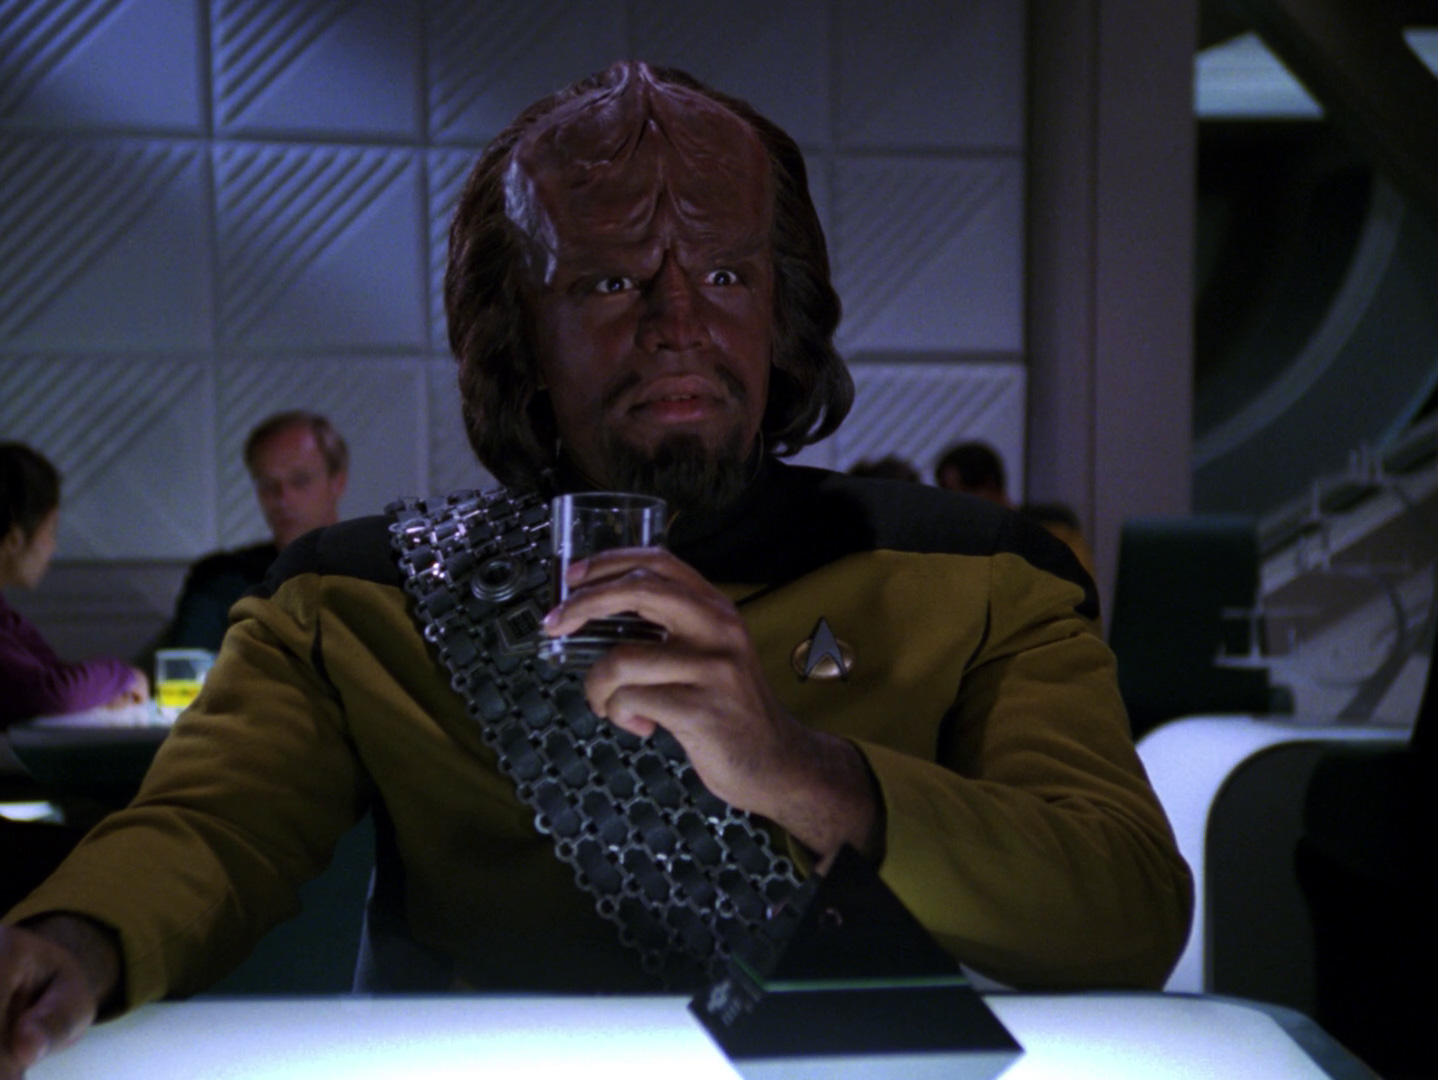 Lieutenant Commander Worf in Ten Forward looks shocked after trying his first glass of prune juice